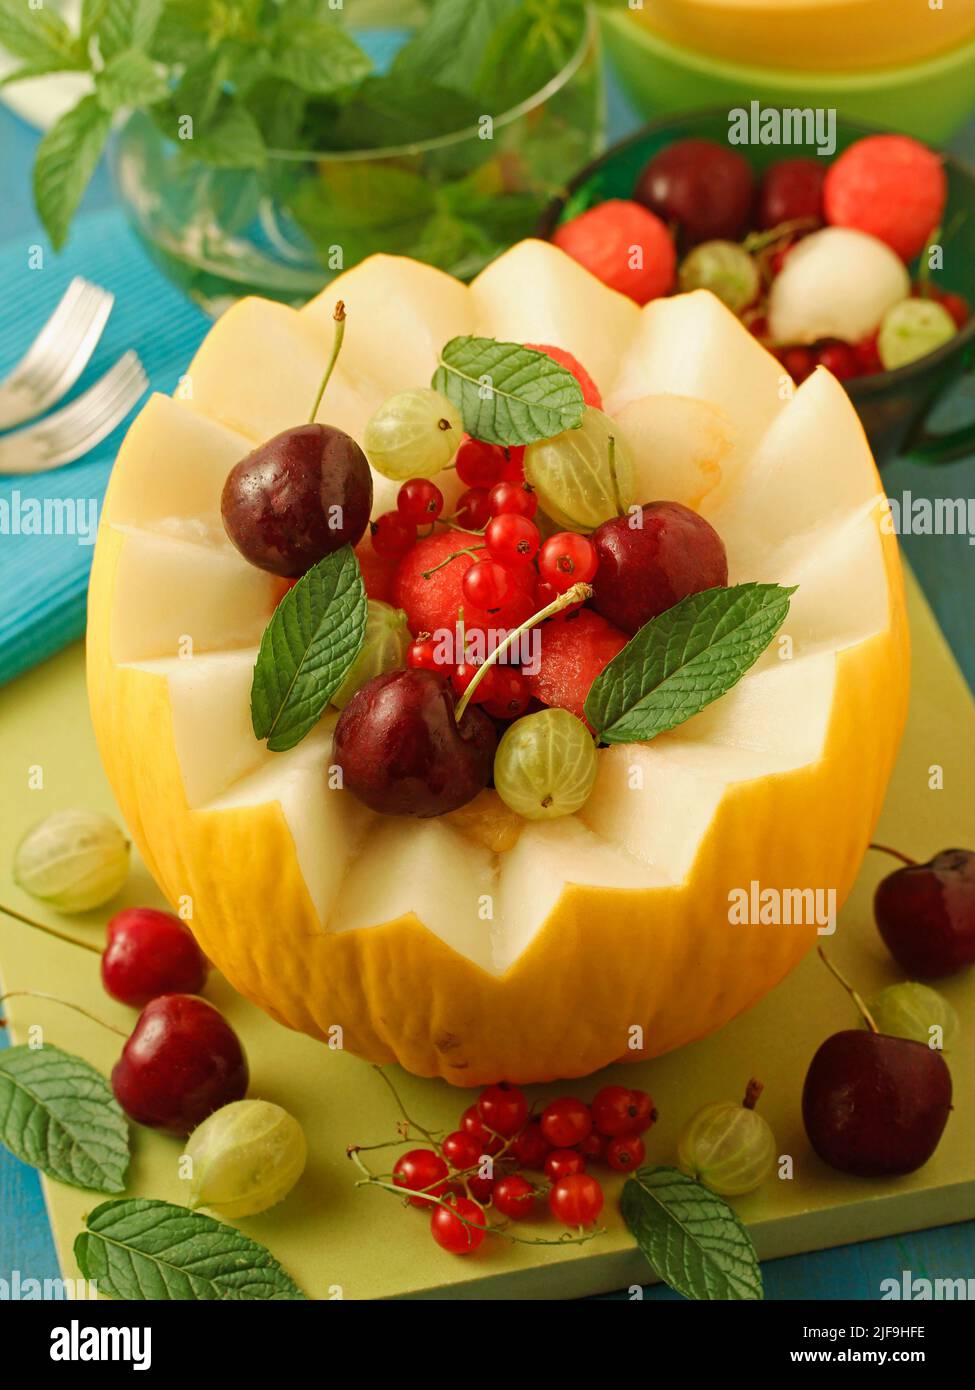 Melon filled with varied fruits. Stock Photo